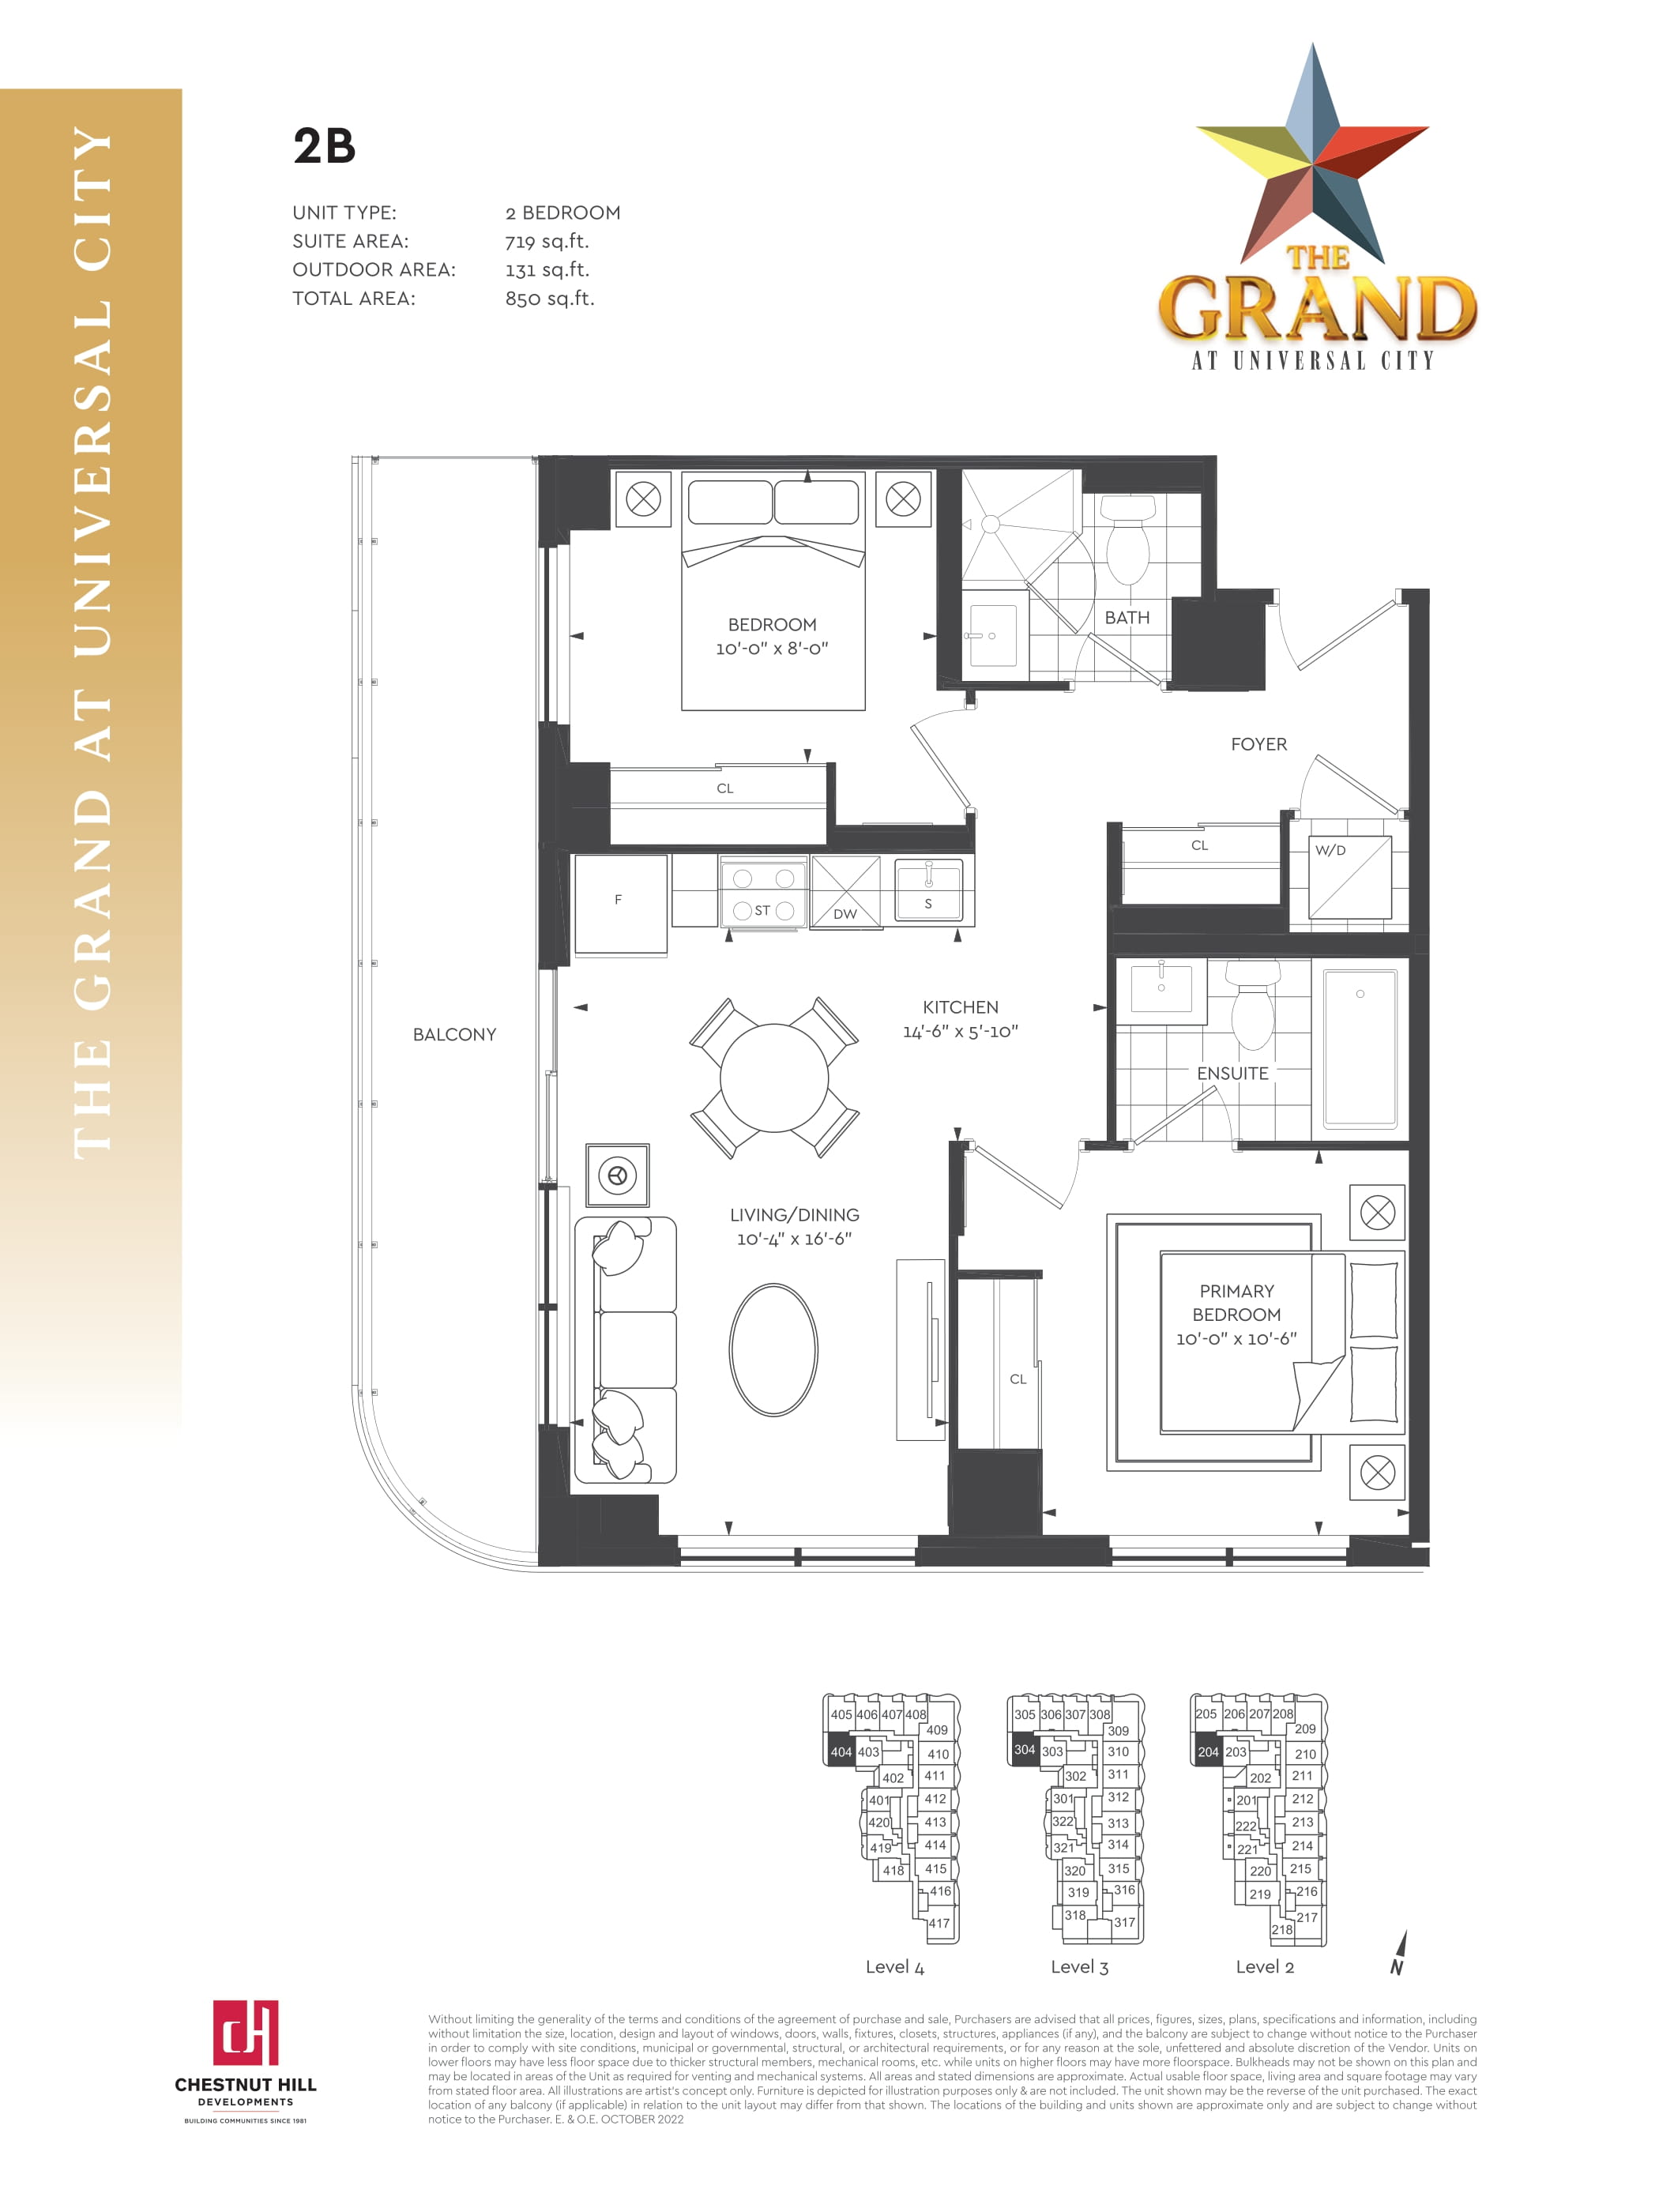  Floor Plan of The Grand at Universal City with undefined beds